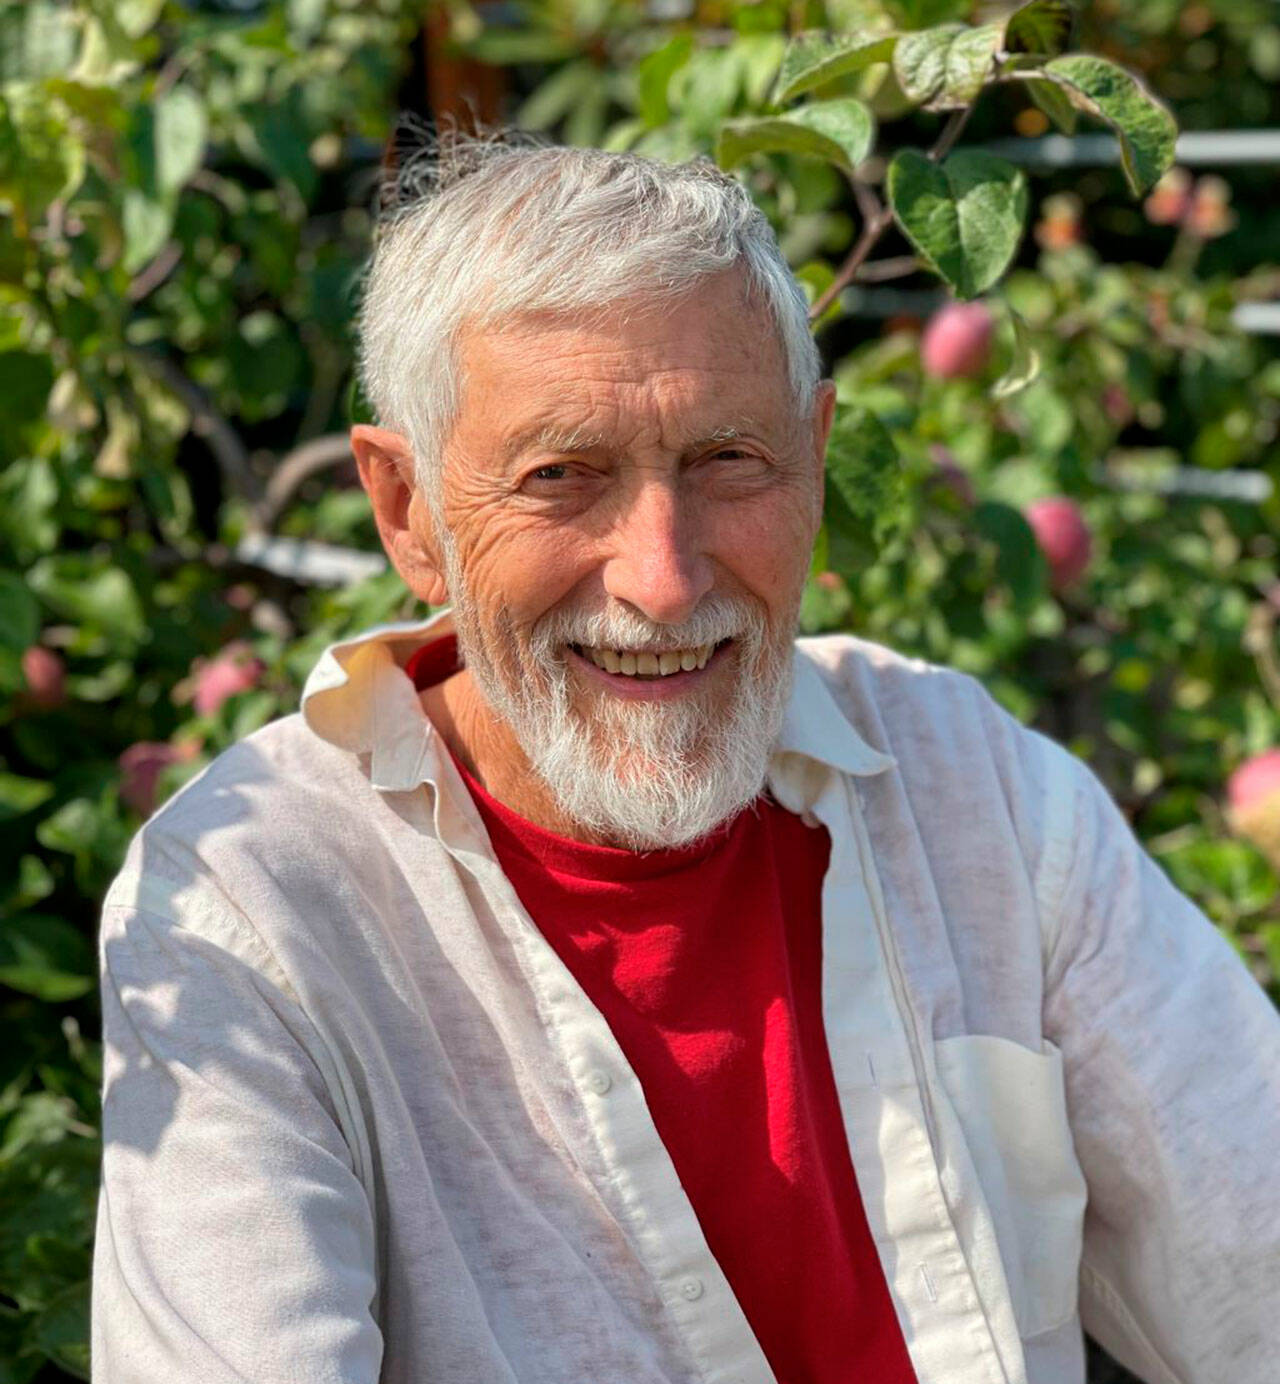 Bruce Pape, Clallam County Master Gardener and coordinator of the Woodcock Demonstration Garden orchard, discusses fruit trees in the residential setting from noon-1 p.m. on Thursday, Sept. 23, via Zoom. Submitted photo